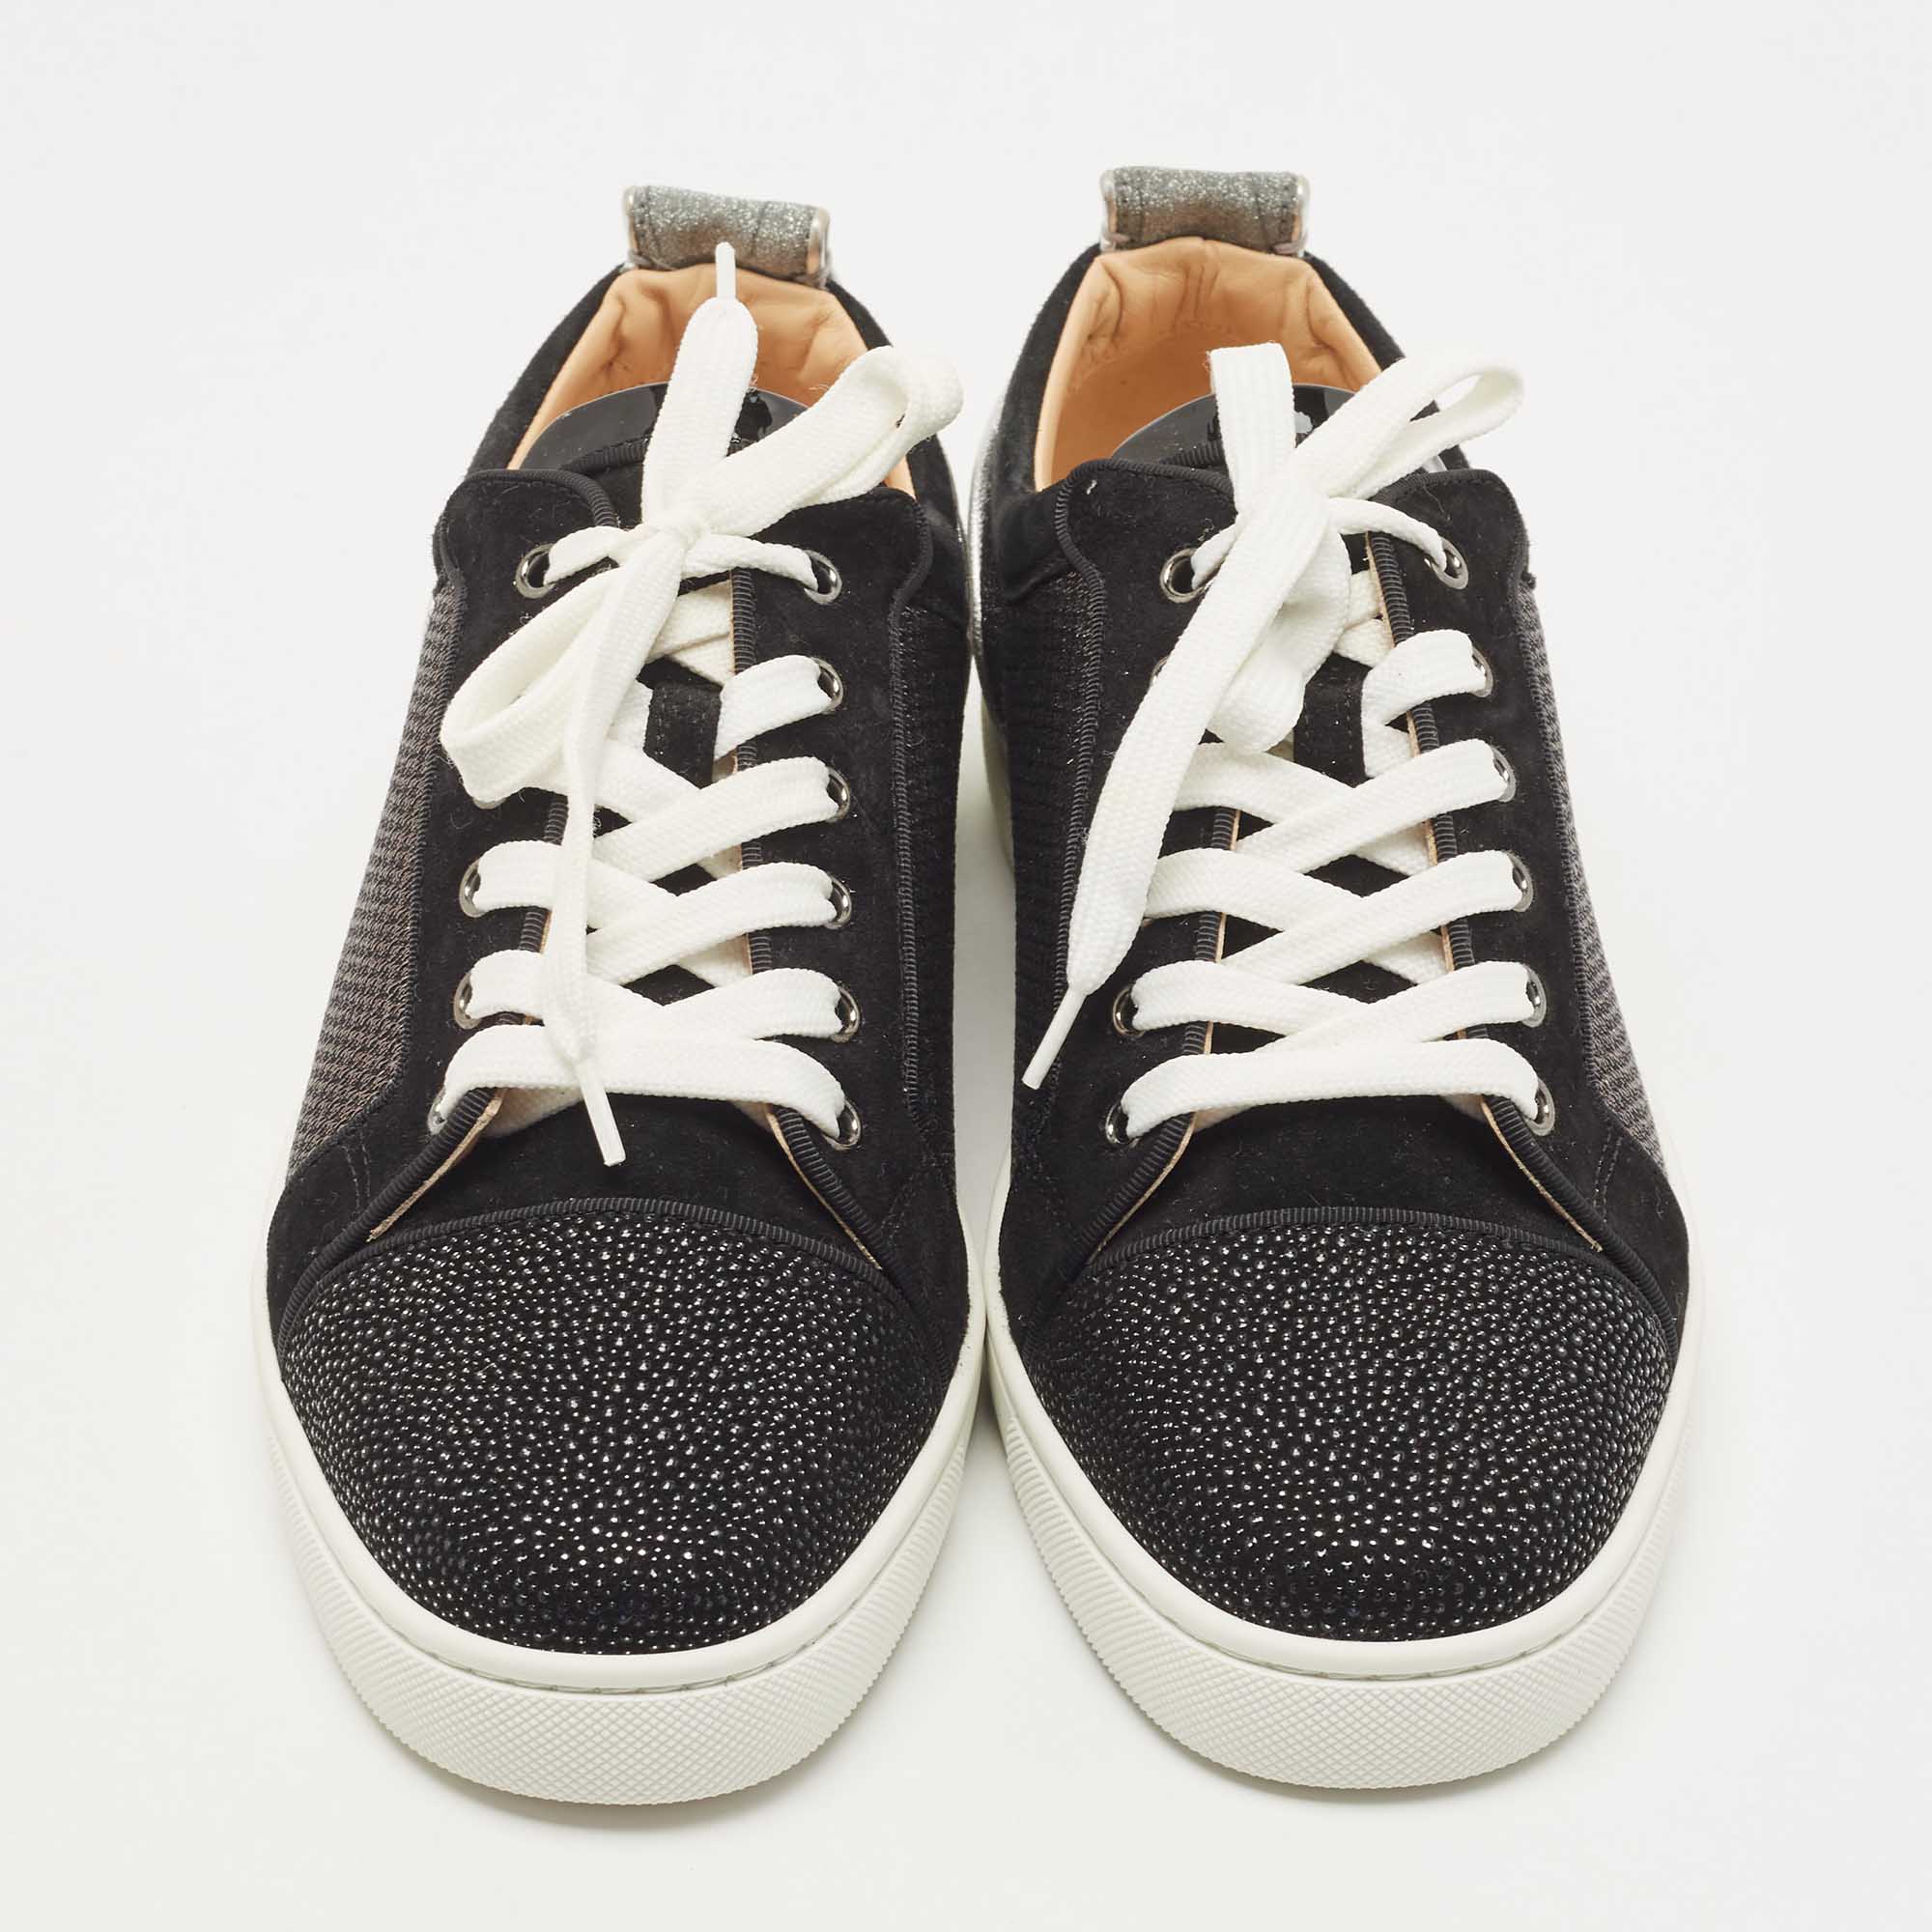 Christian Louboutin Black/Silver Suede Louis Junior Strass Low Top Sneakers Size 40.5